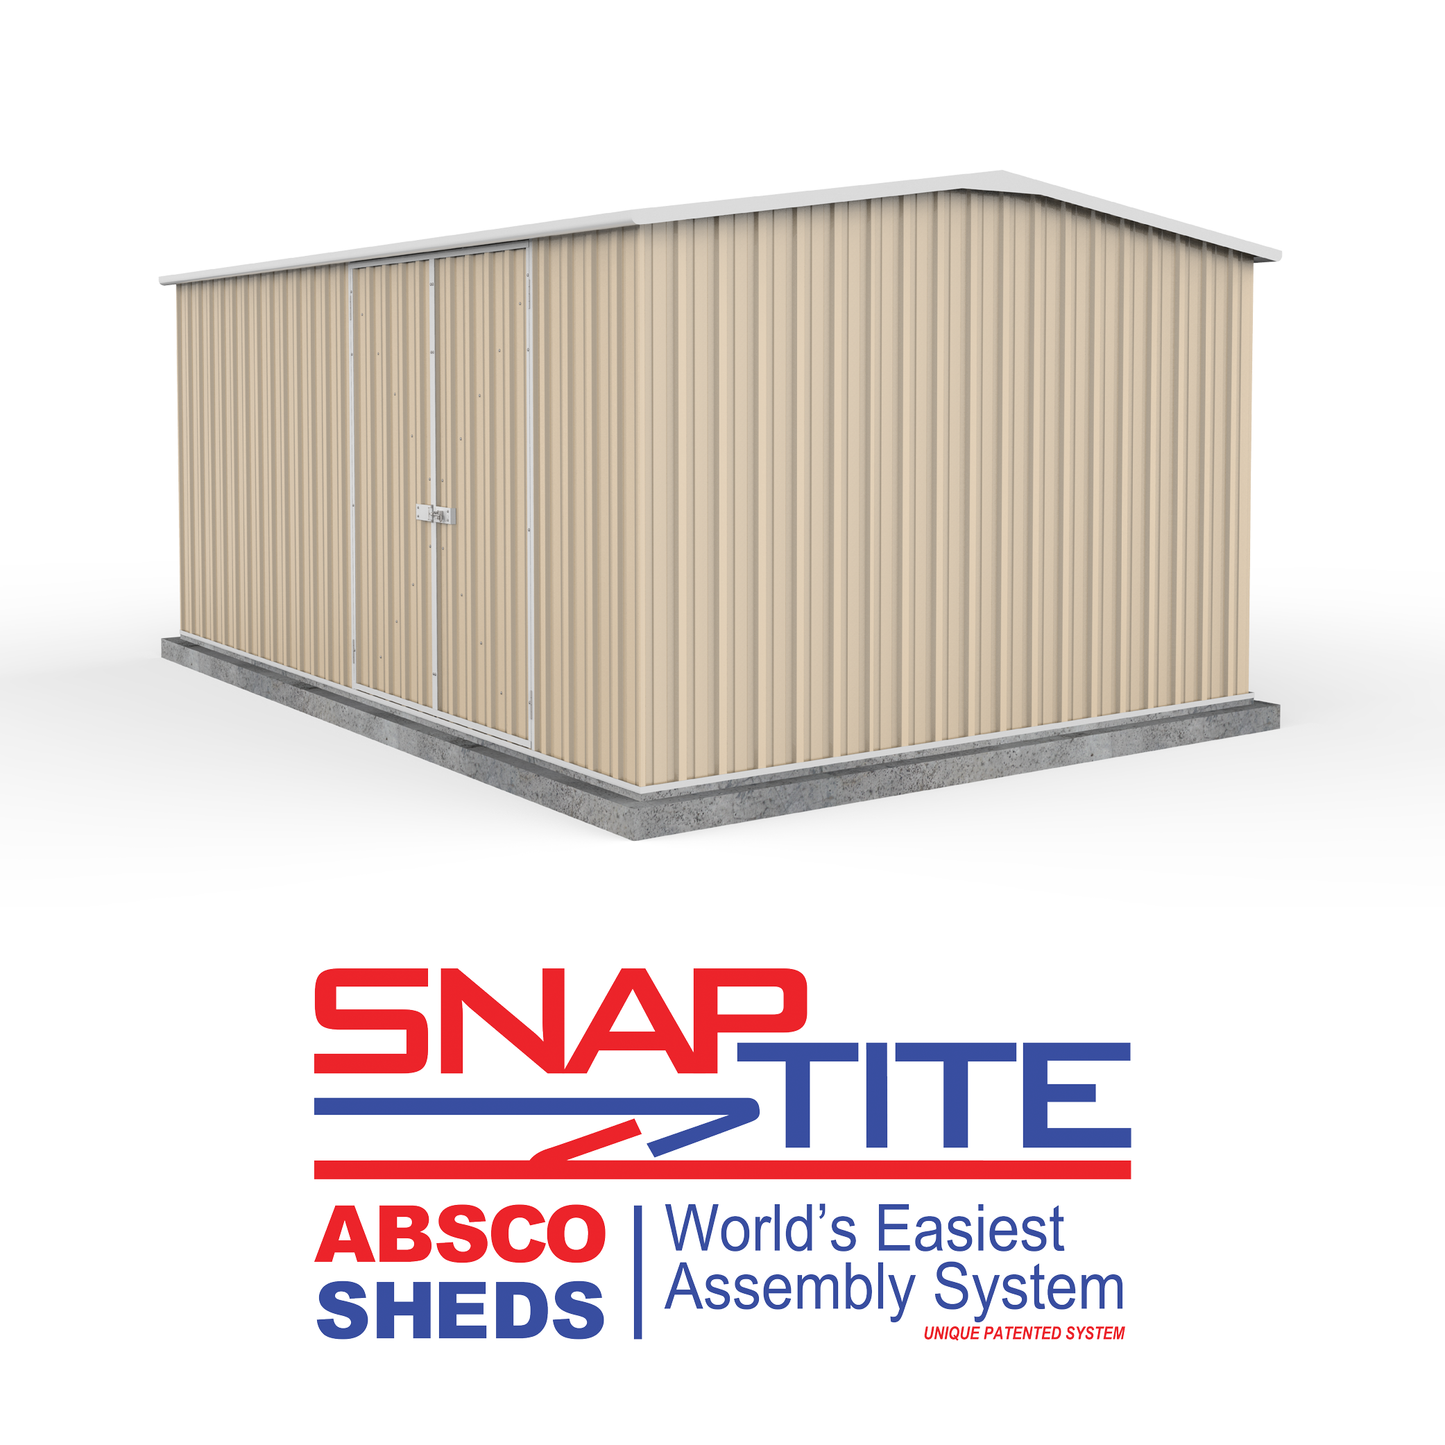 Absco 4.48mW x 3.00mD x 2.06mH Double Door Workshop Shed - Classic Cream